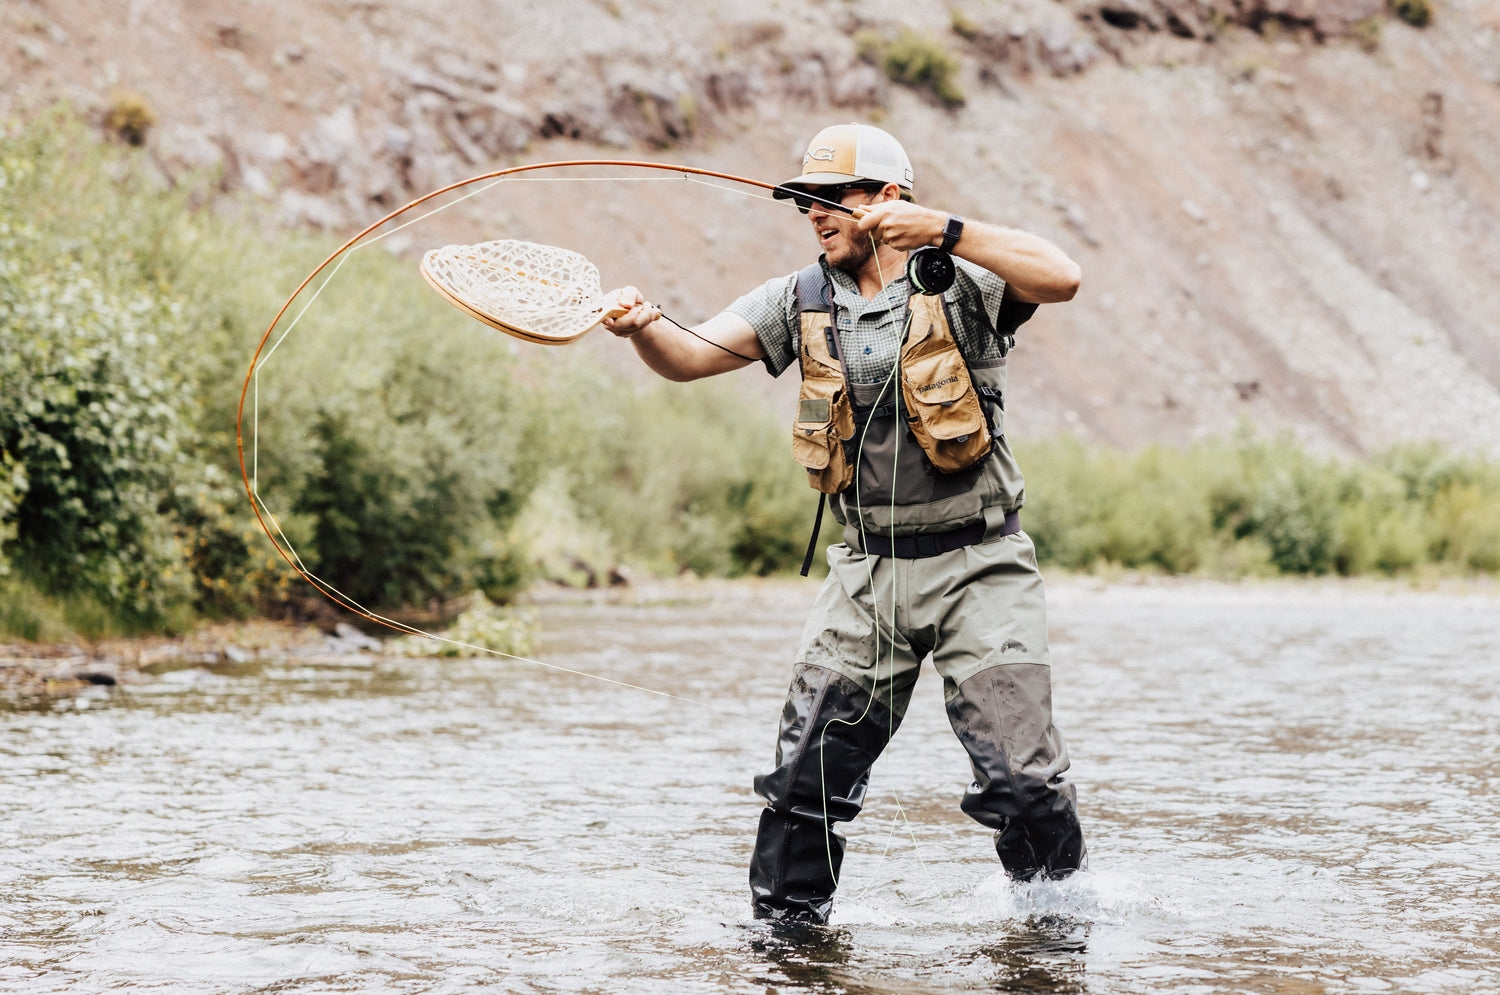 Fiberglass Fly Rods: Why They're Great and How to Fish Them